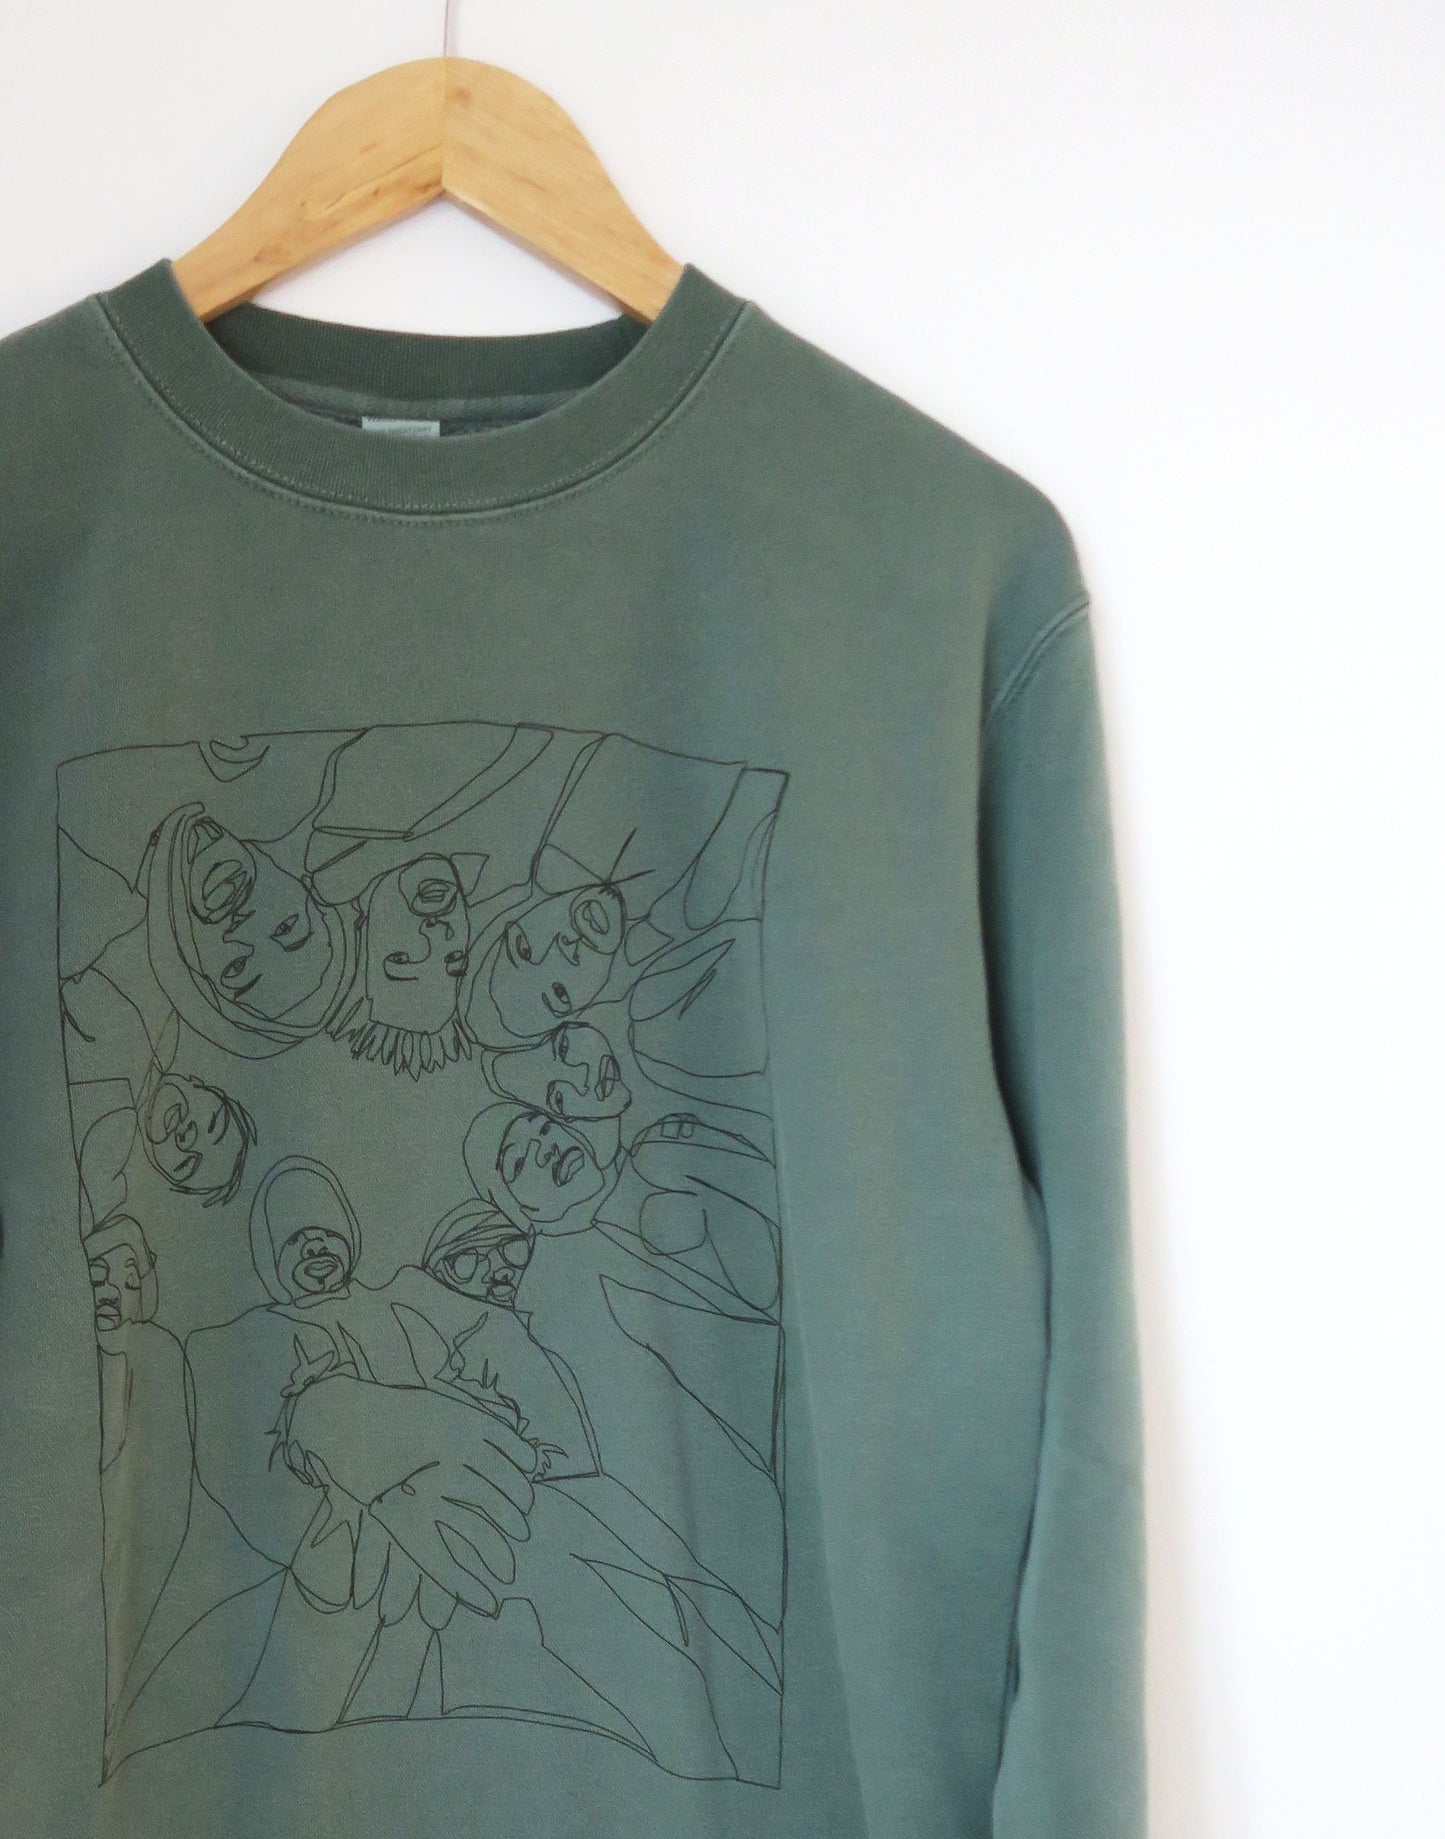 Wu-Tang Forever Oversized Sweater, Vintage Pine Green